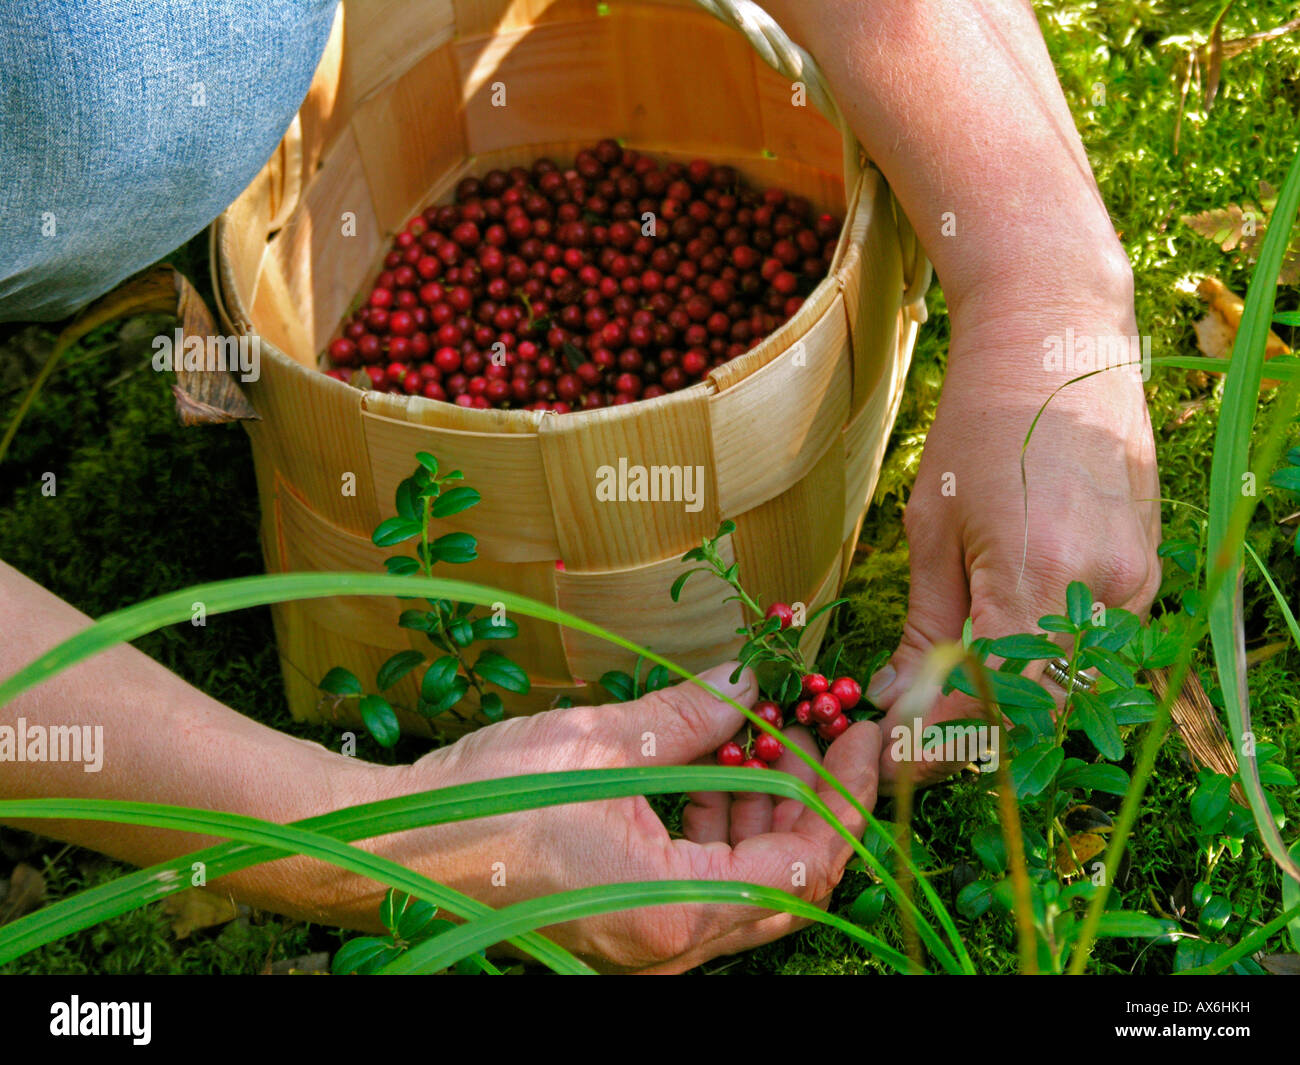 Close-up of person's hands picking cowberries Stock Photo